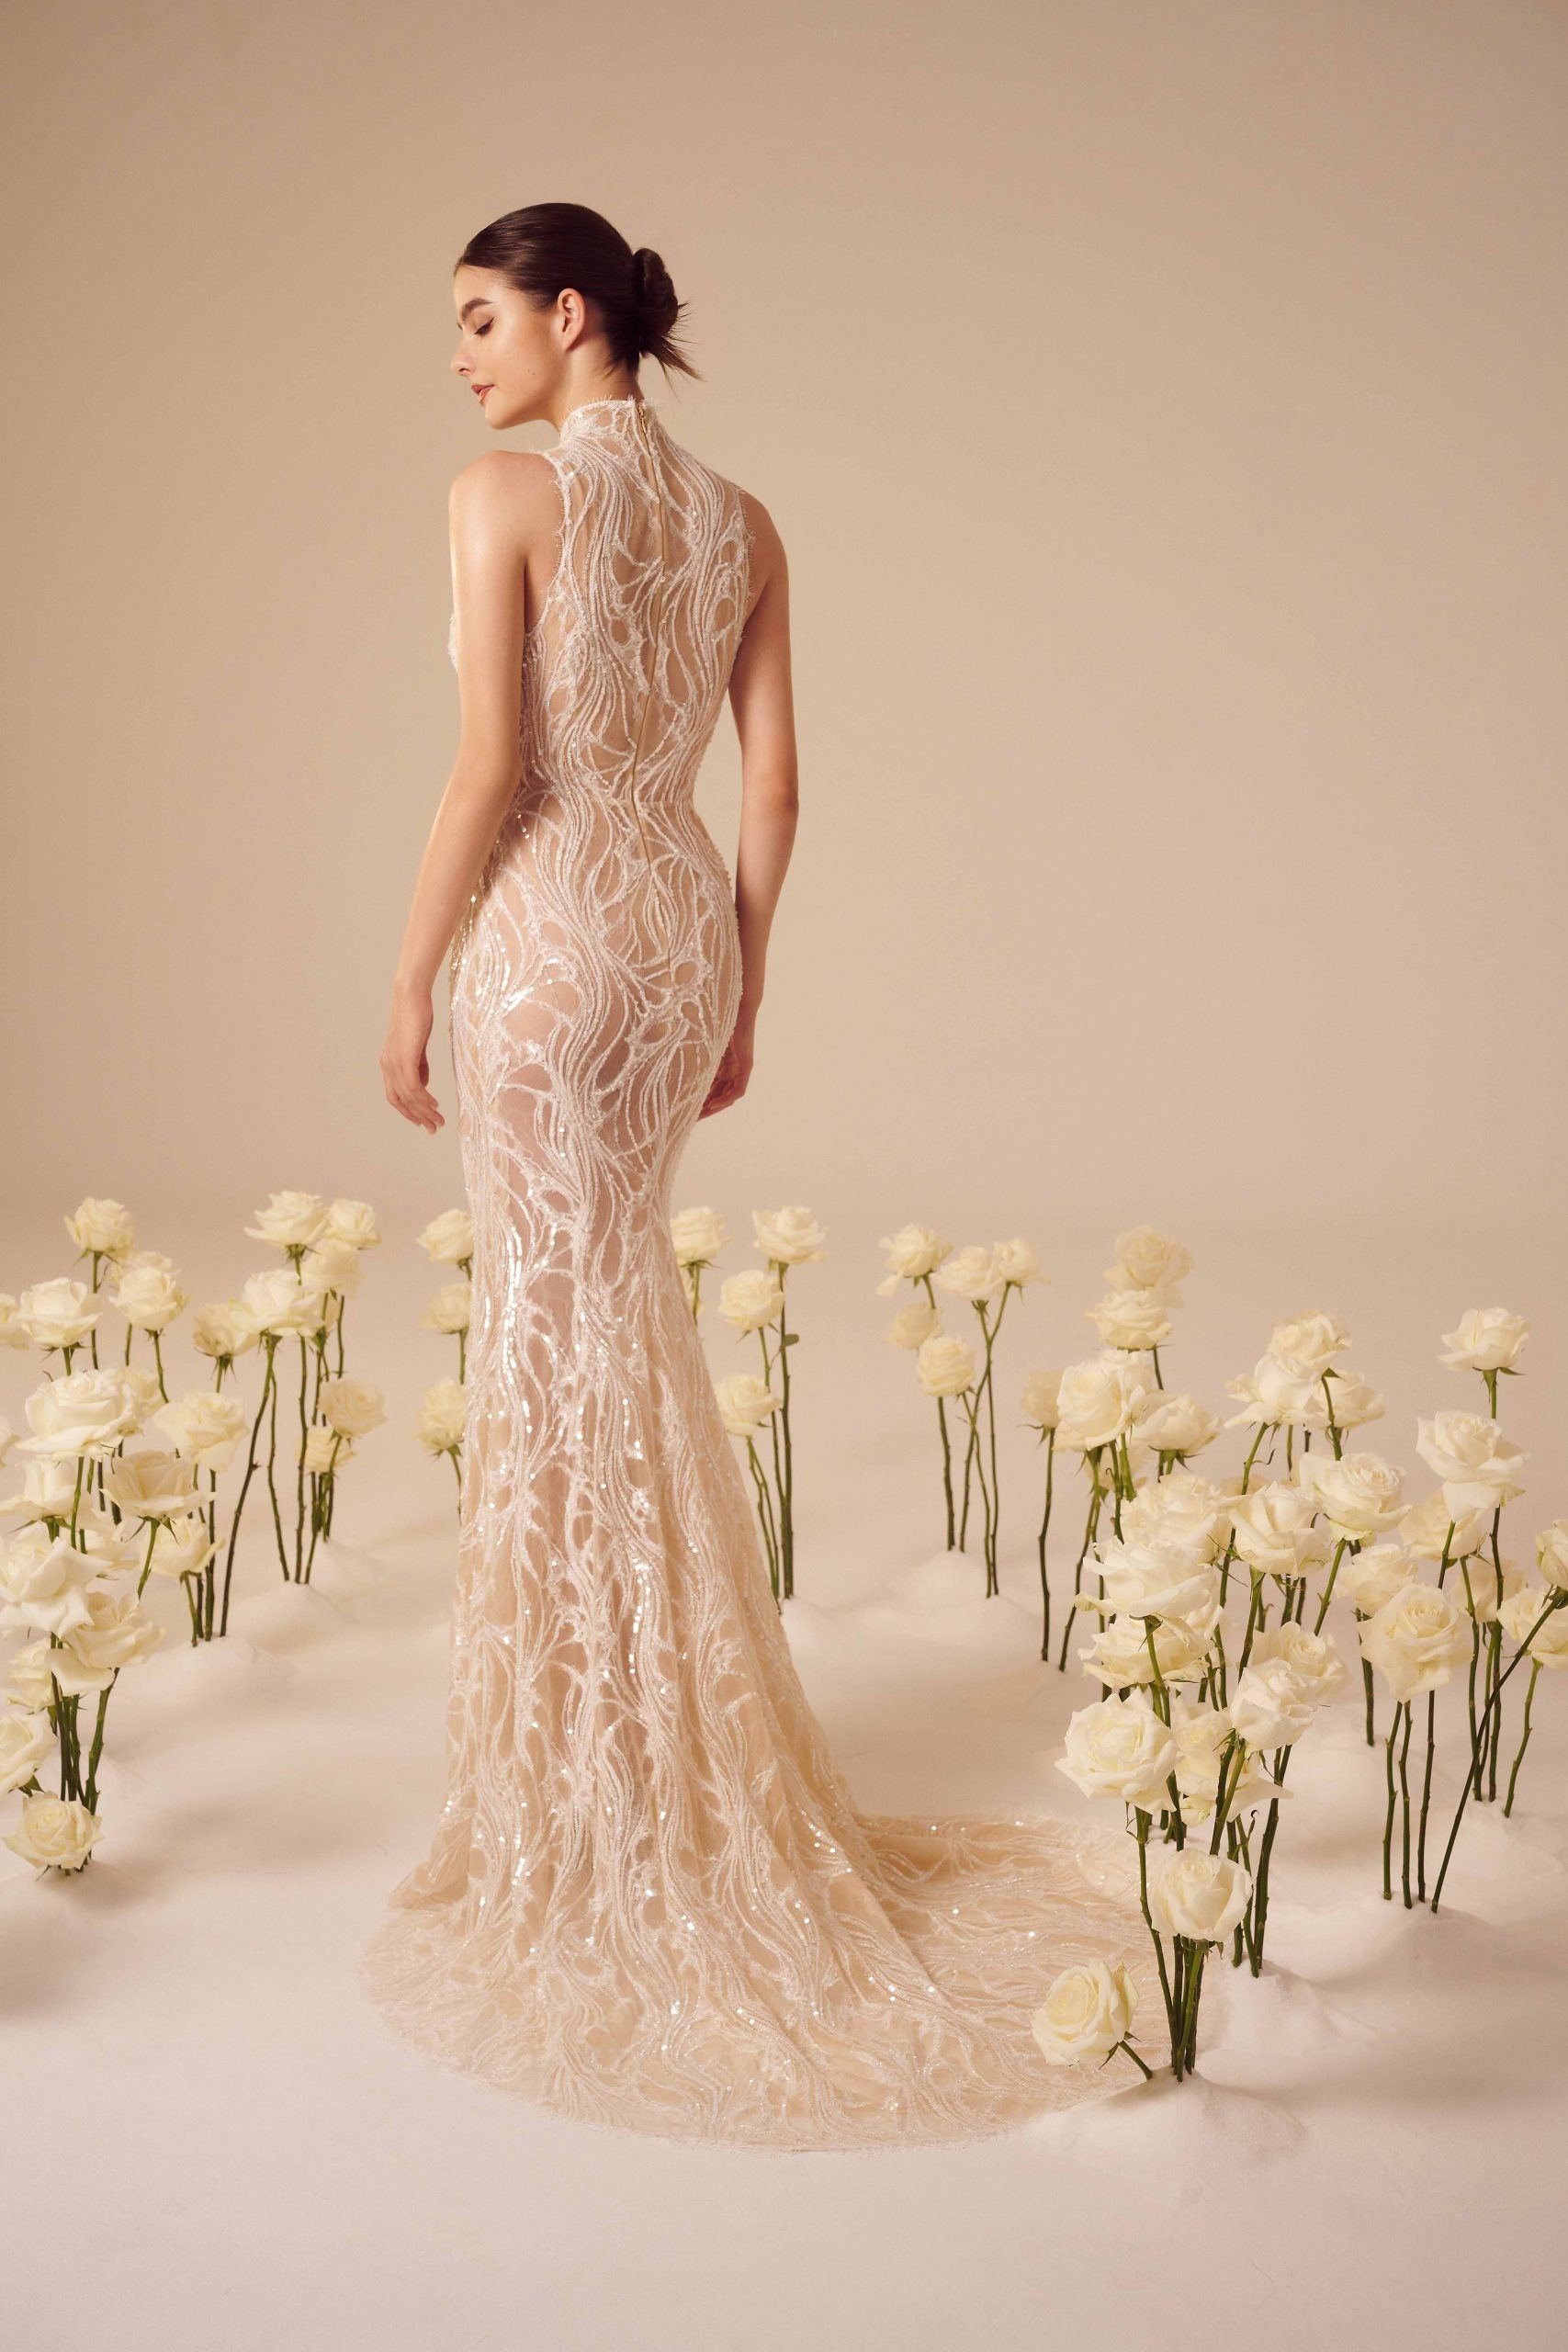 High-Neck Sequin Sheath Gown by Nicole + Felicia - Image 2